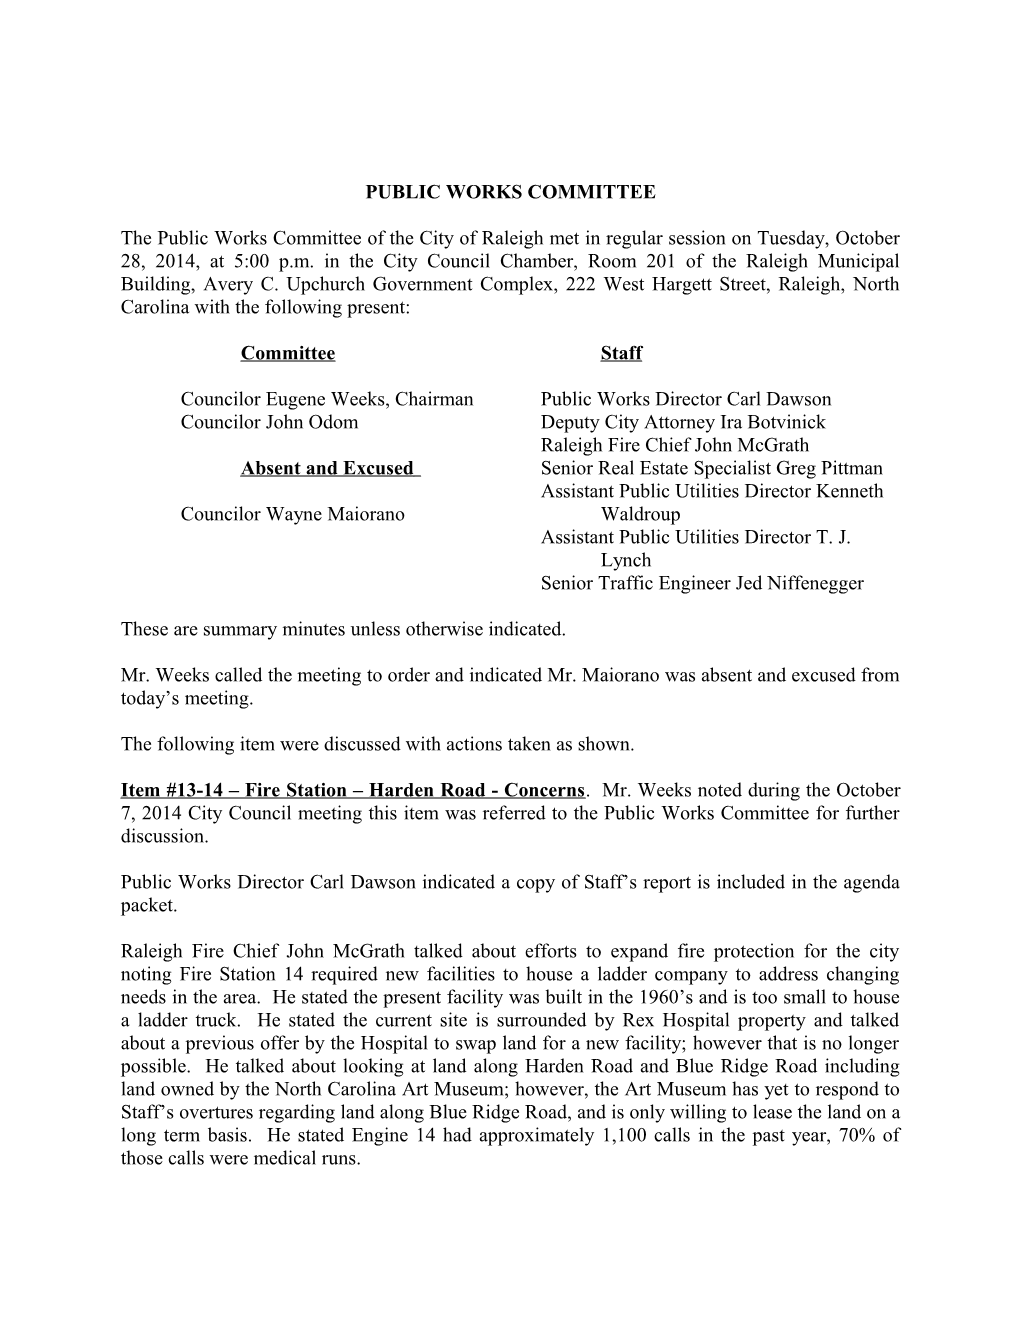 Public Works Committee Minutes - 10/28/2014